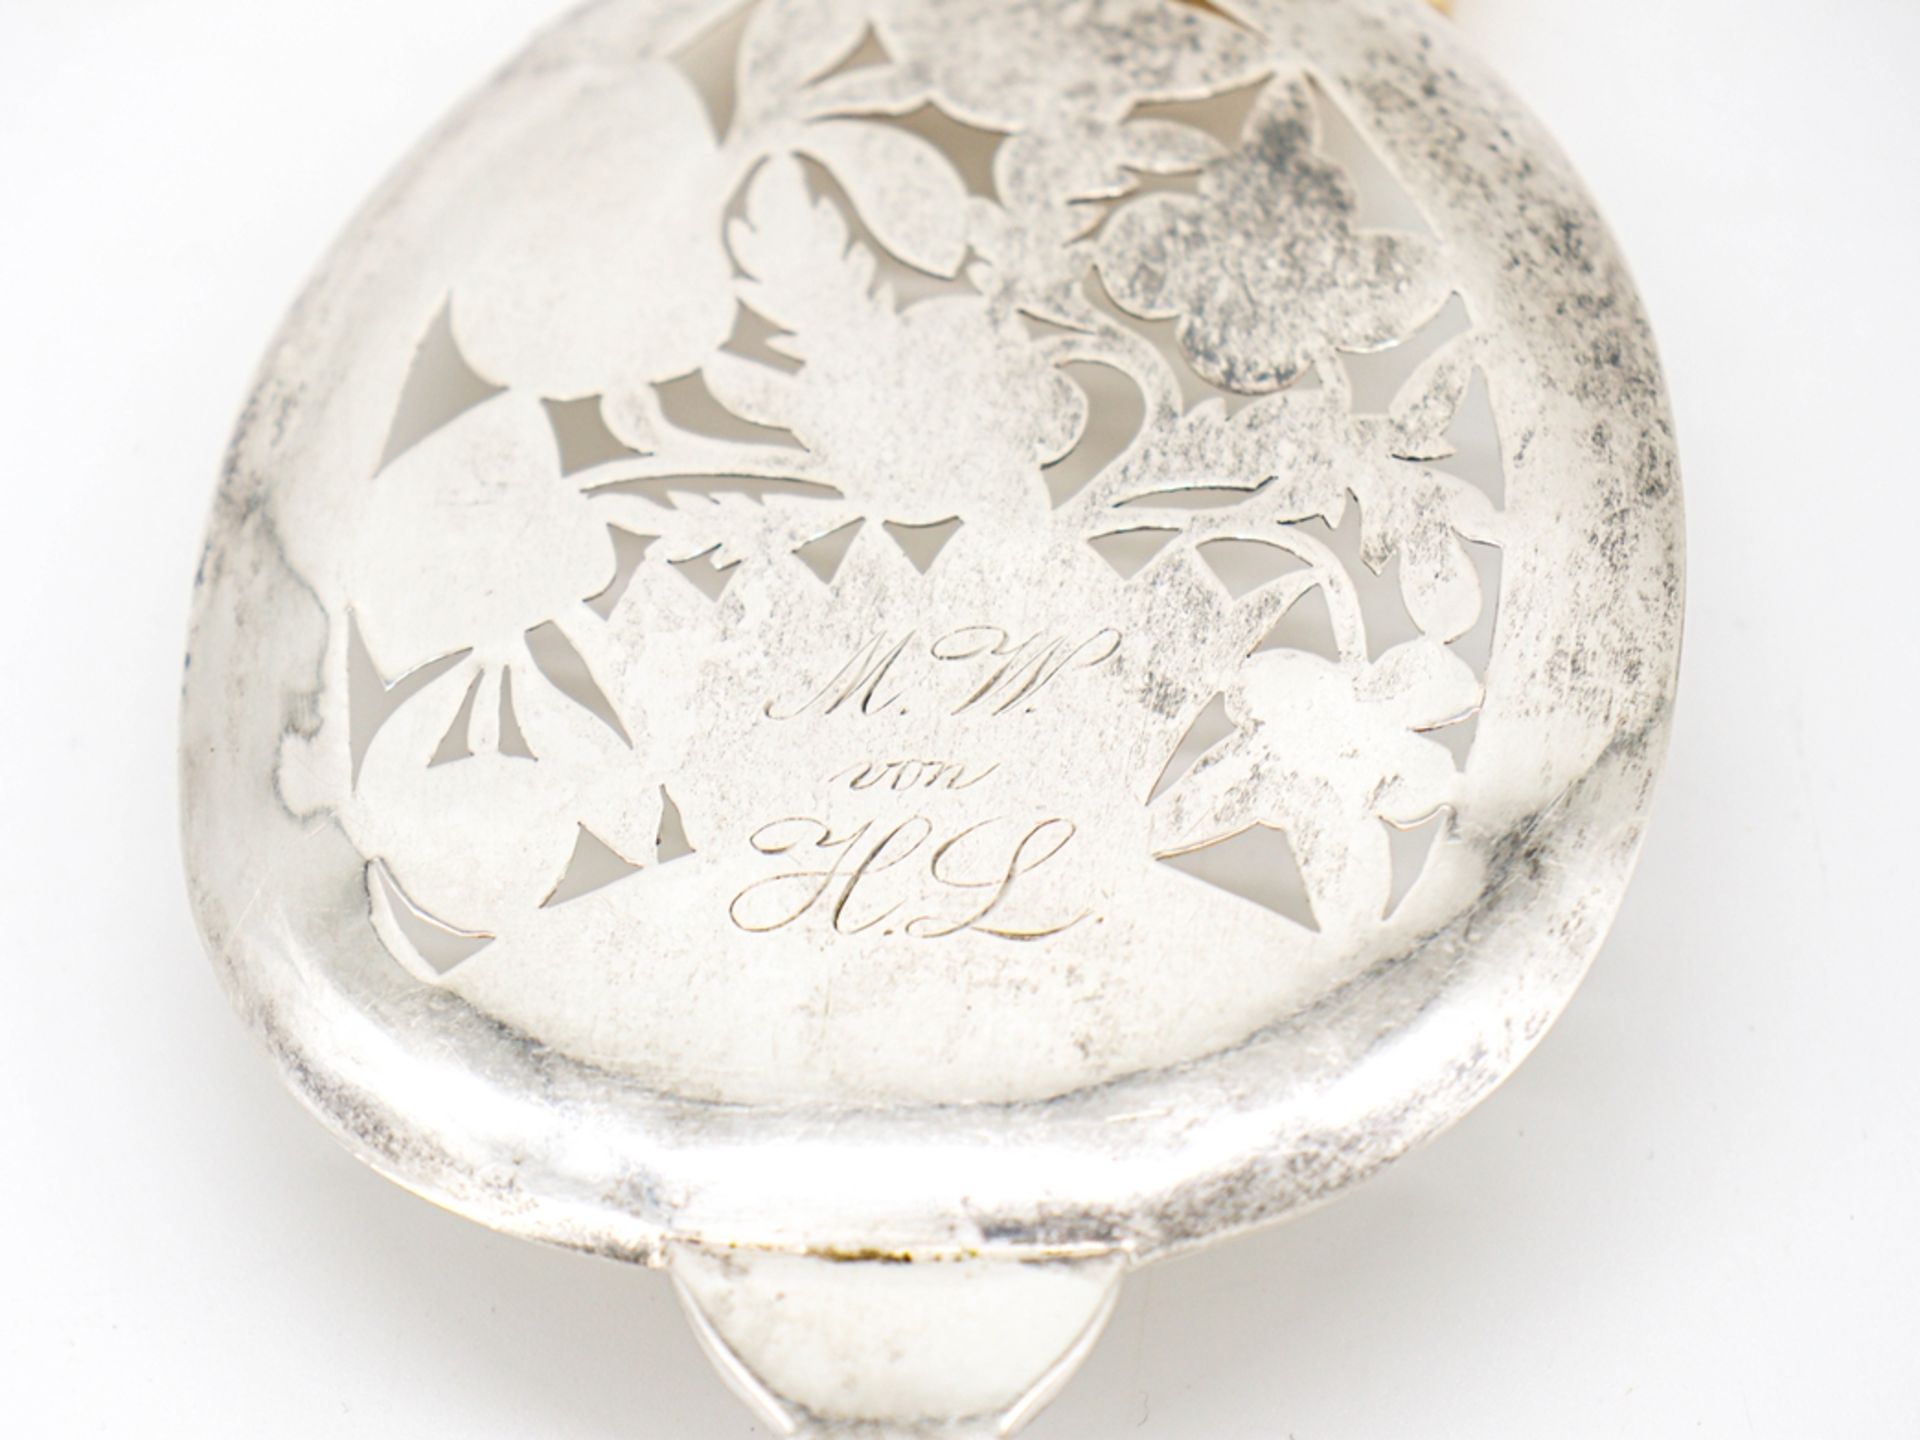 Pâté server with leg handle, chased silver, finest chasing, around 1800 - Image 5 of 7